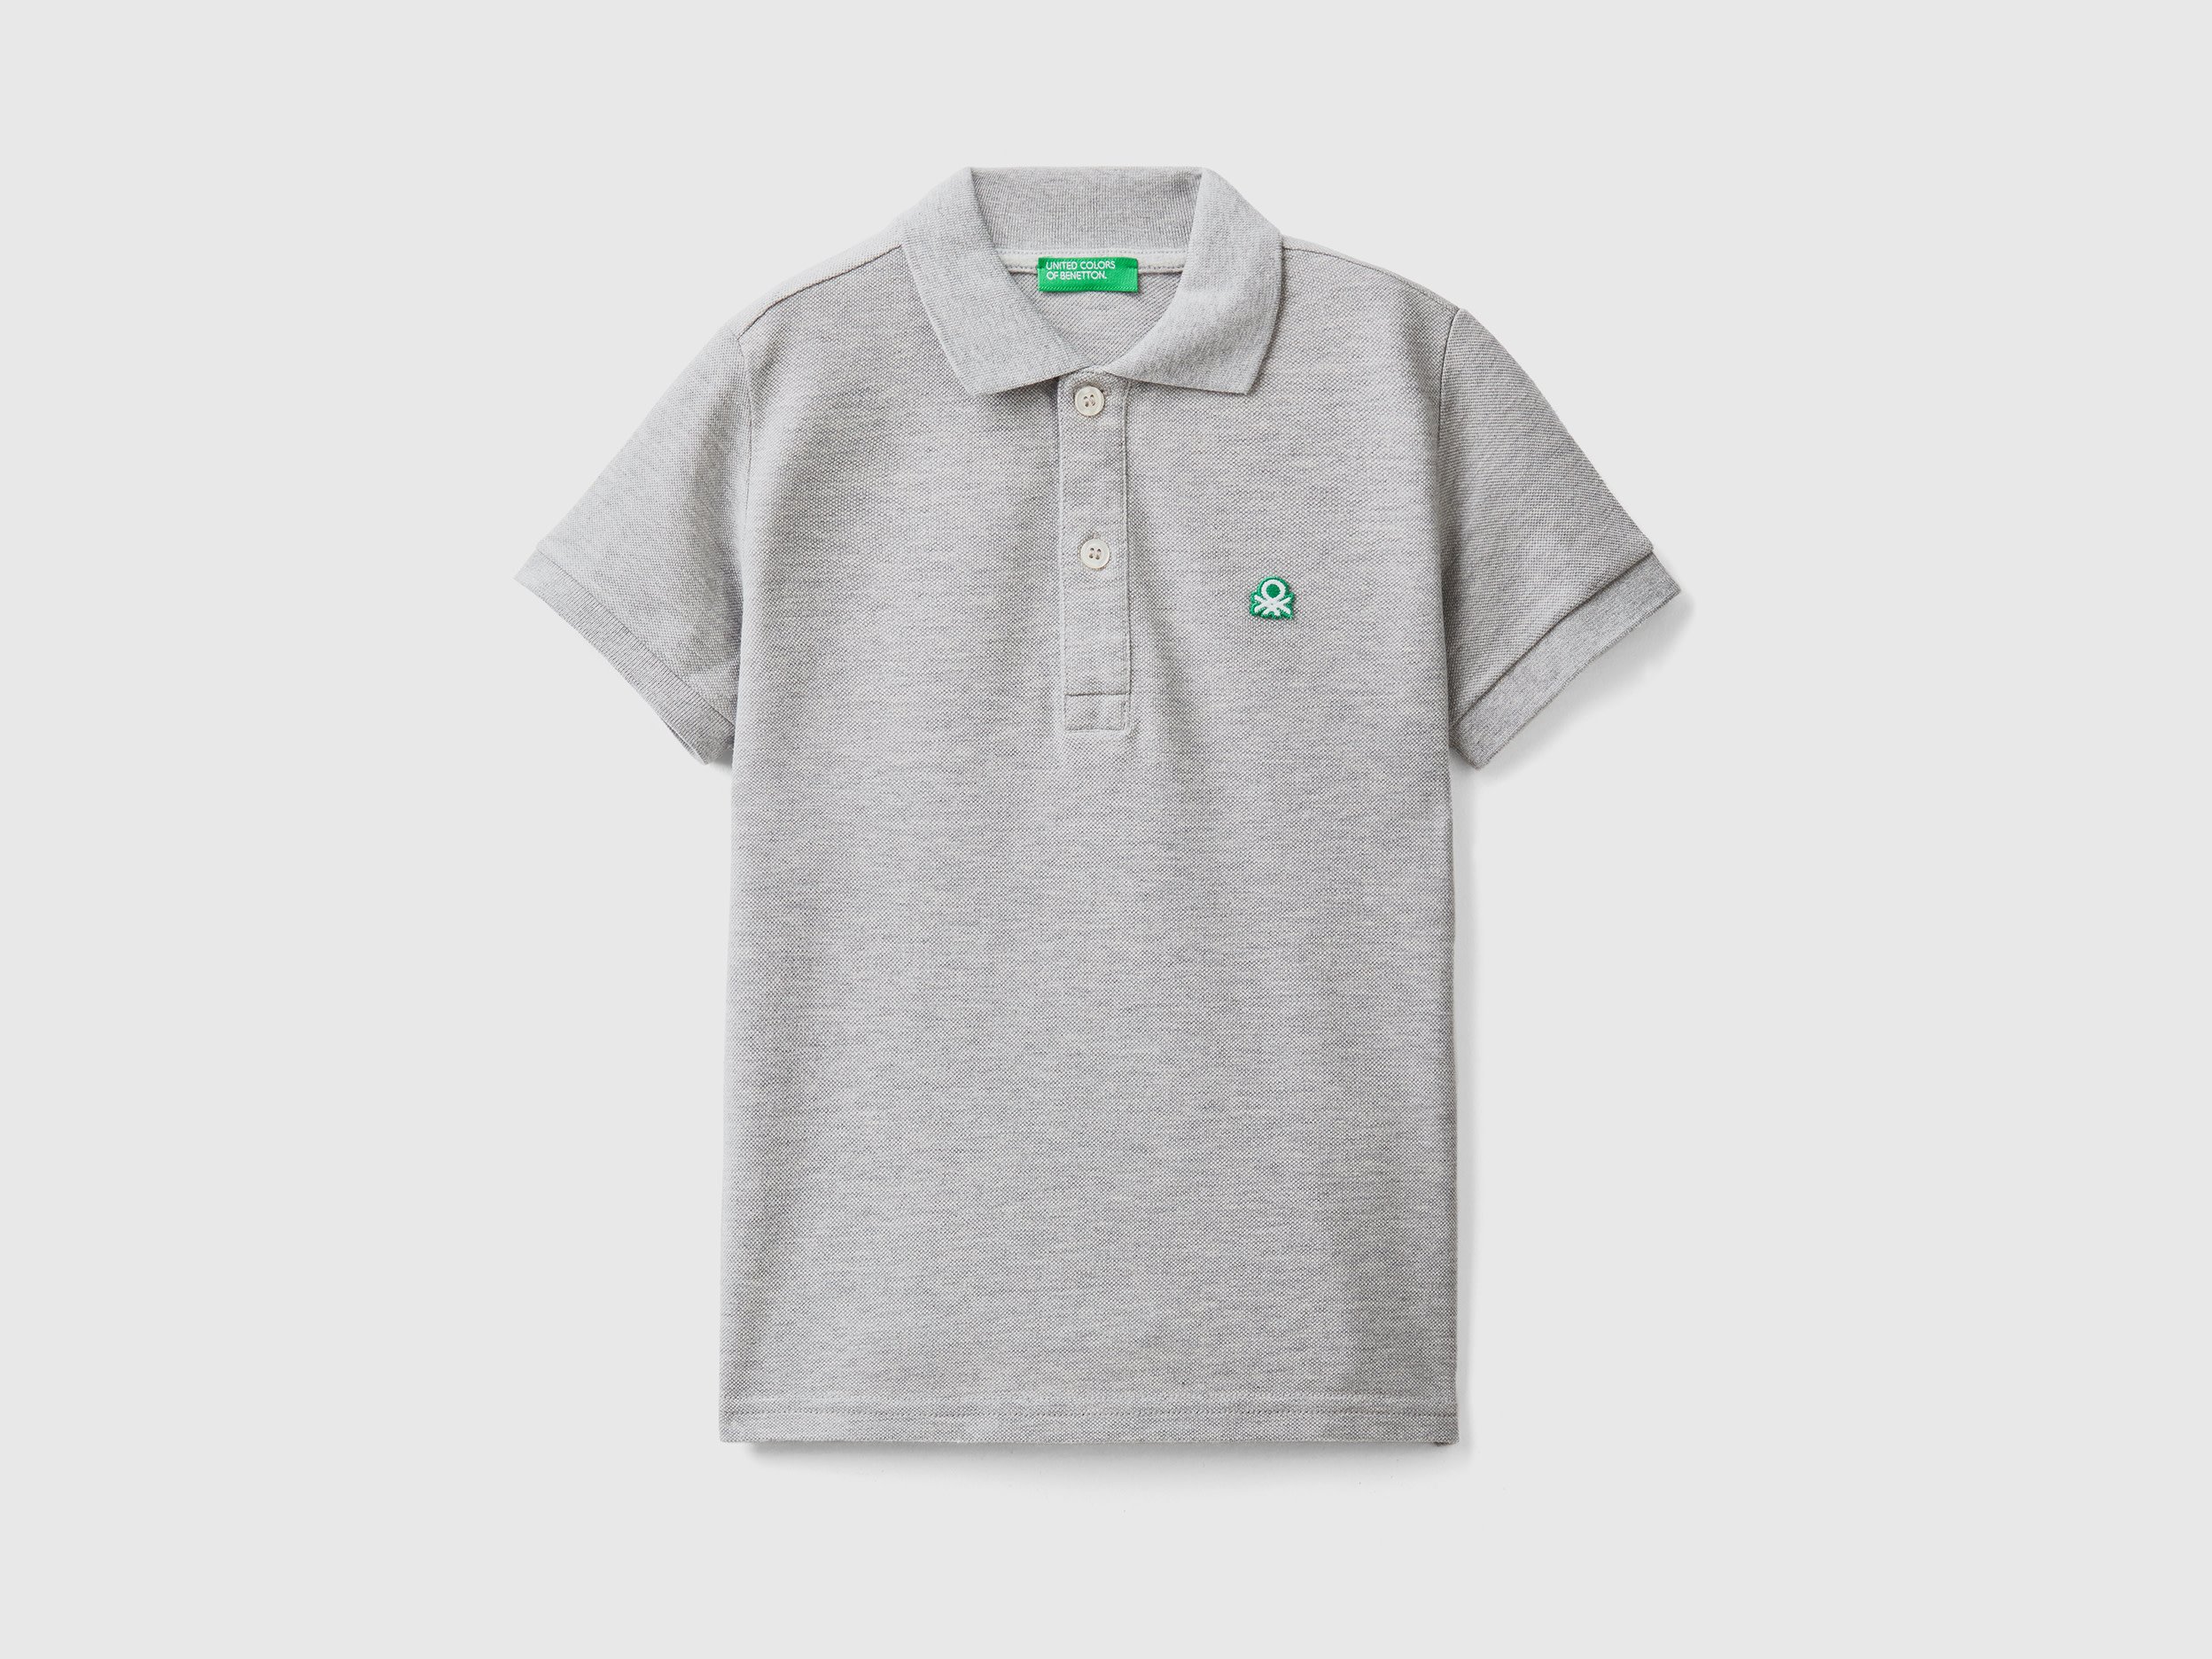 Image of Benetton, Short Sleeve Polo In Organic Cotton, size 116, Light Gray, Kids